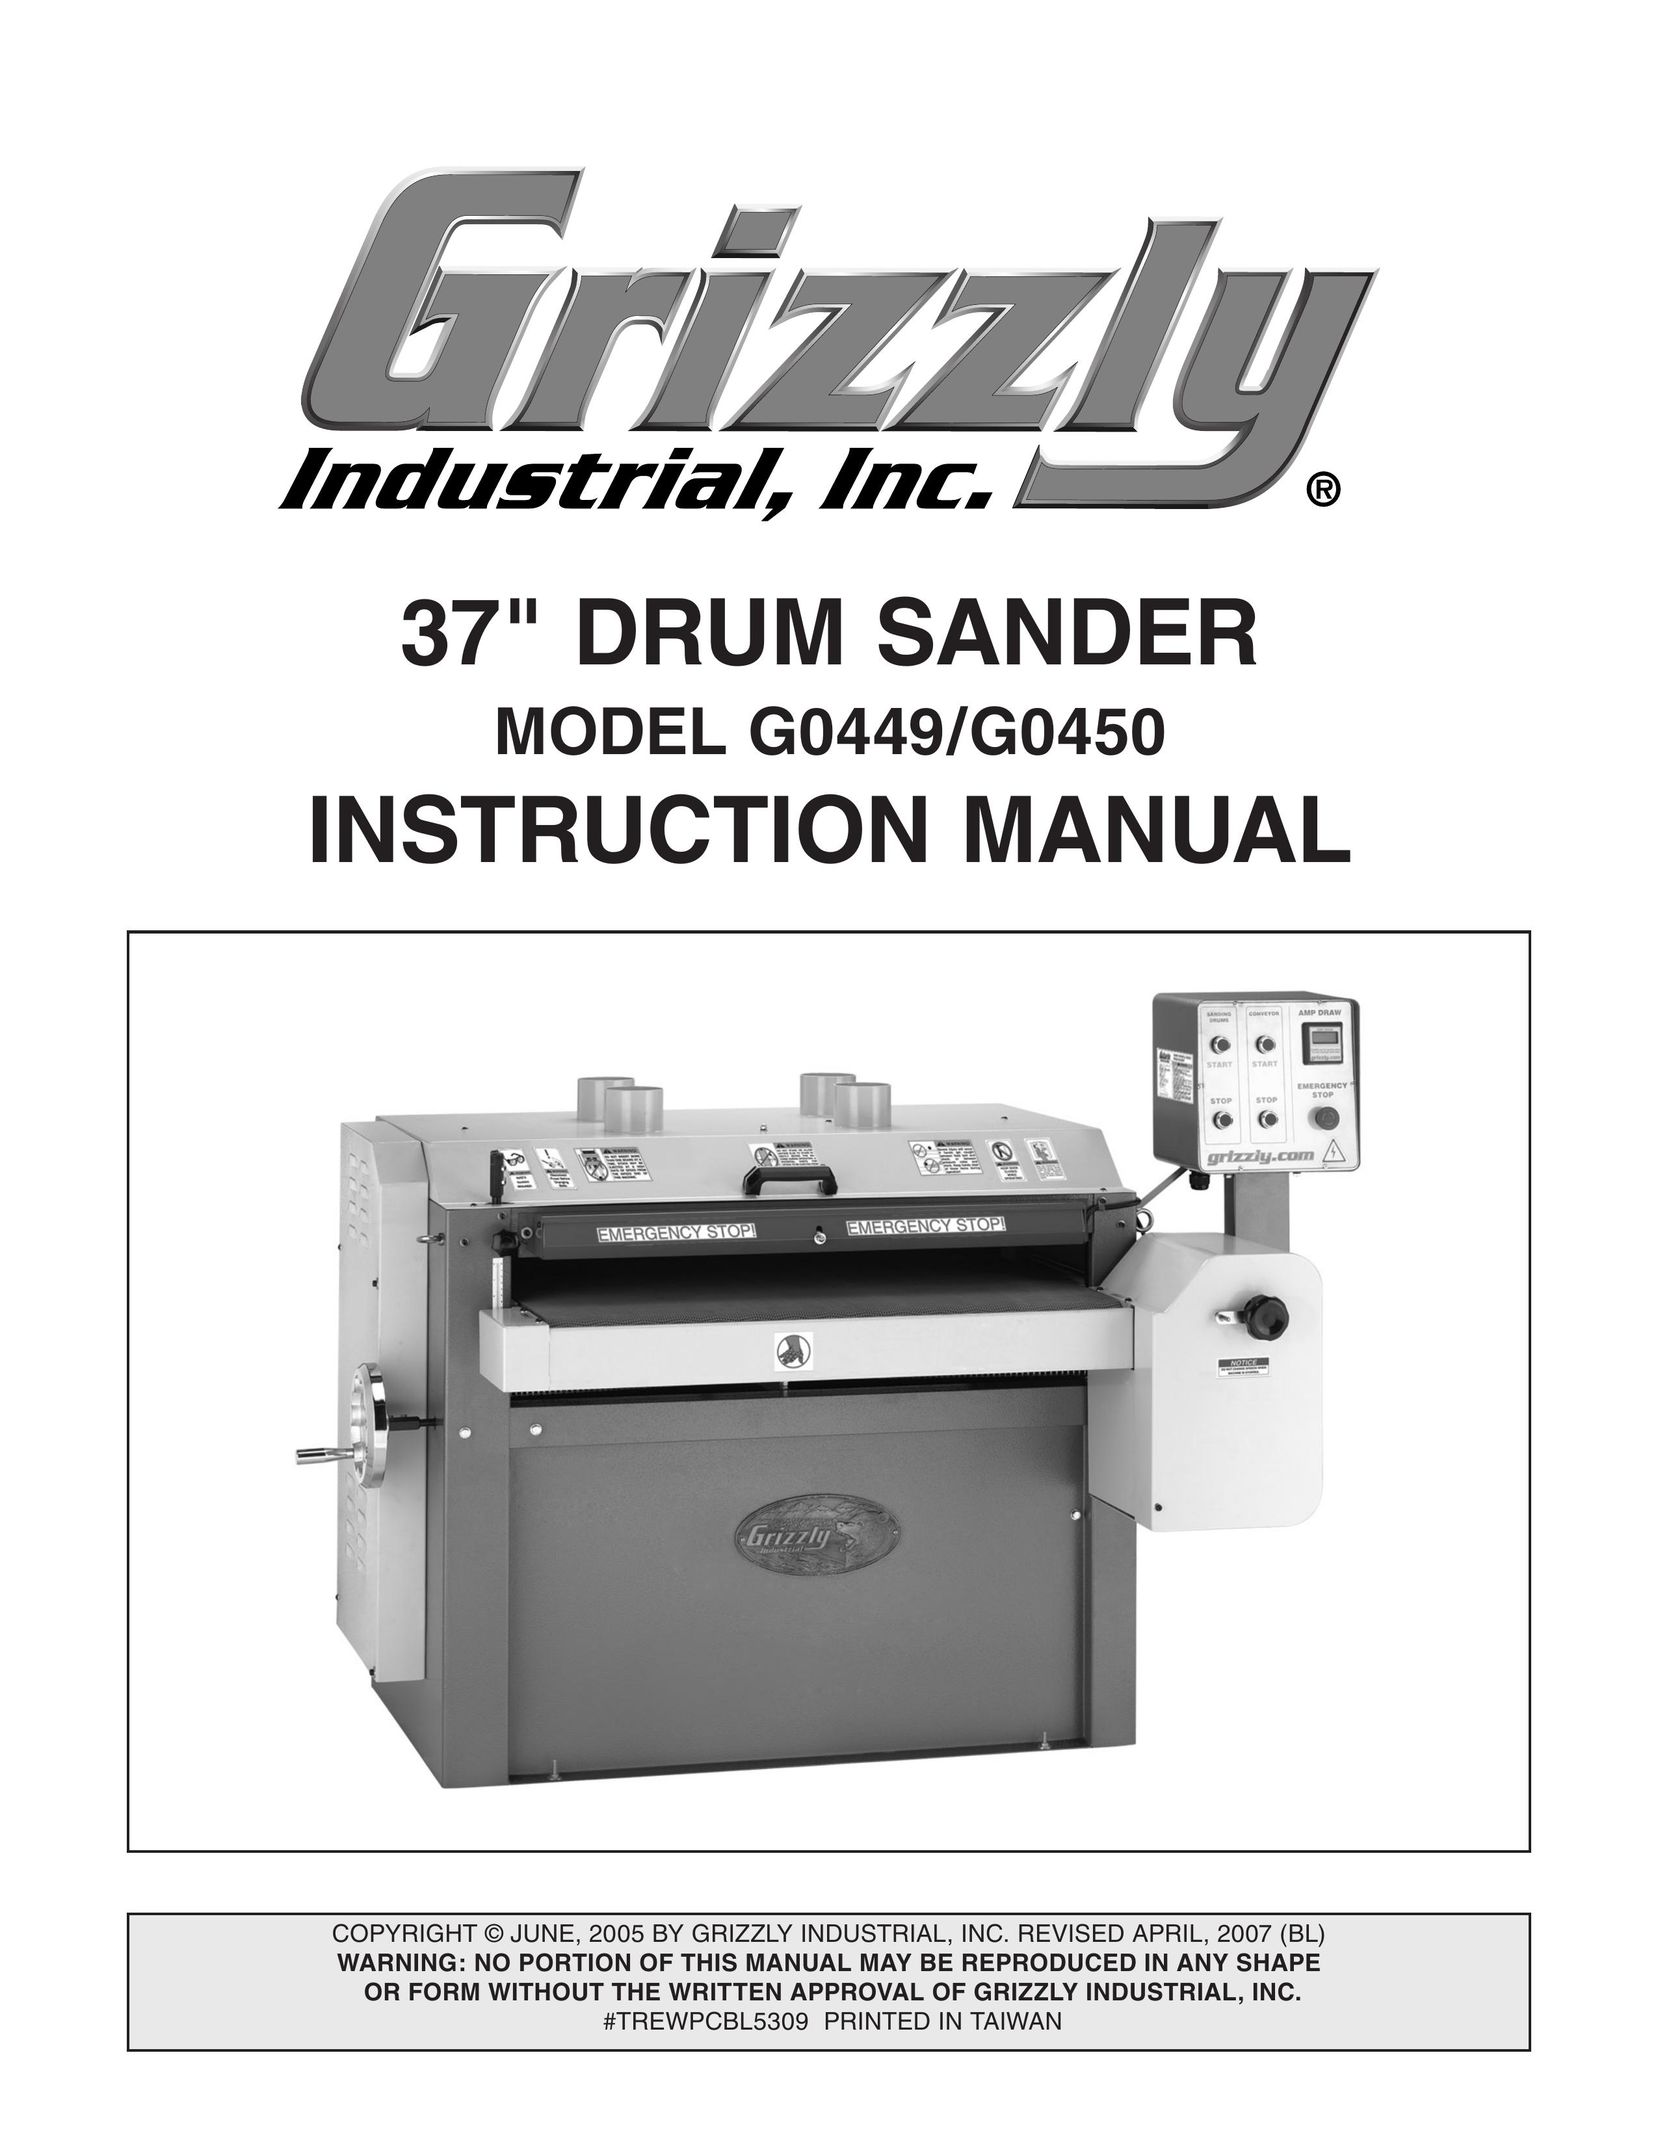 Grizzly G0450 Sander User Manual